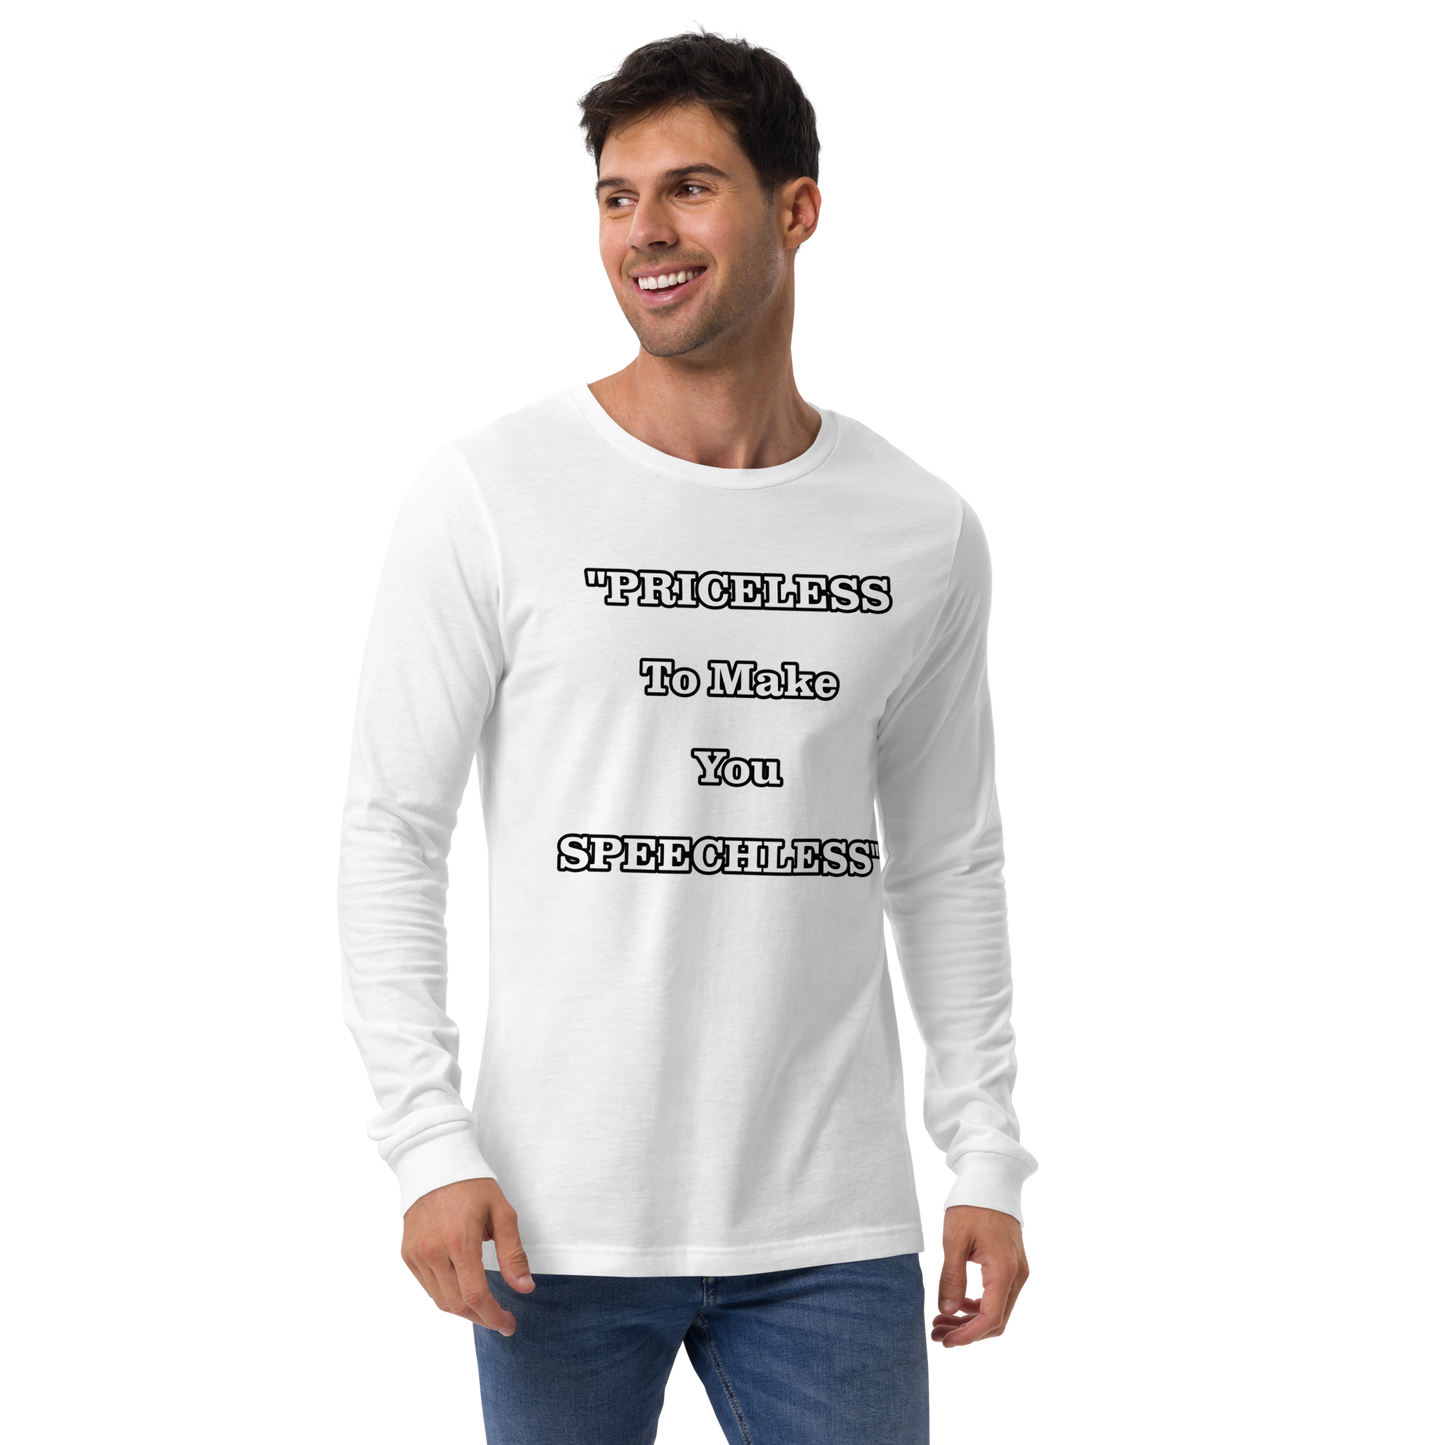 Priceless to Make You Speechless Long Sleeve Shirt